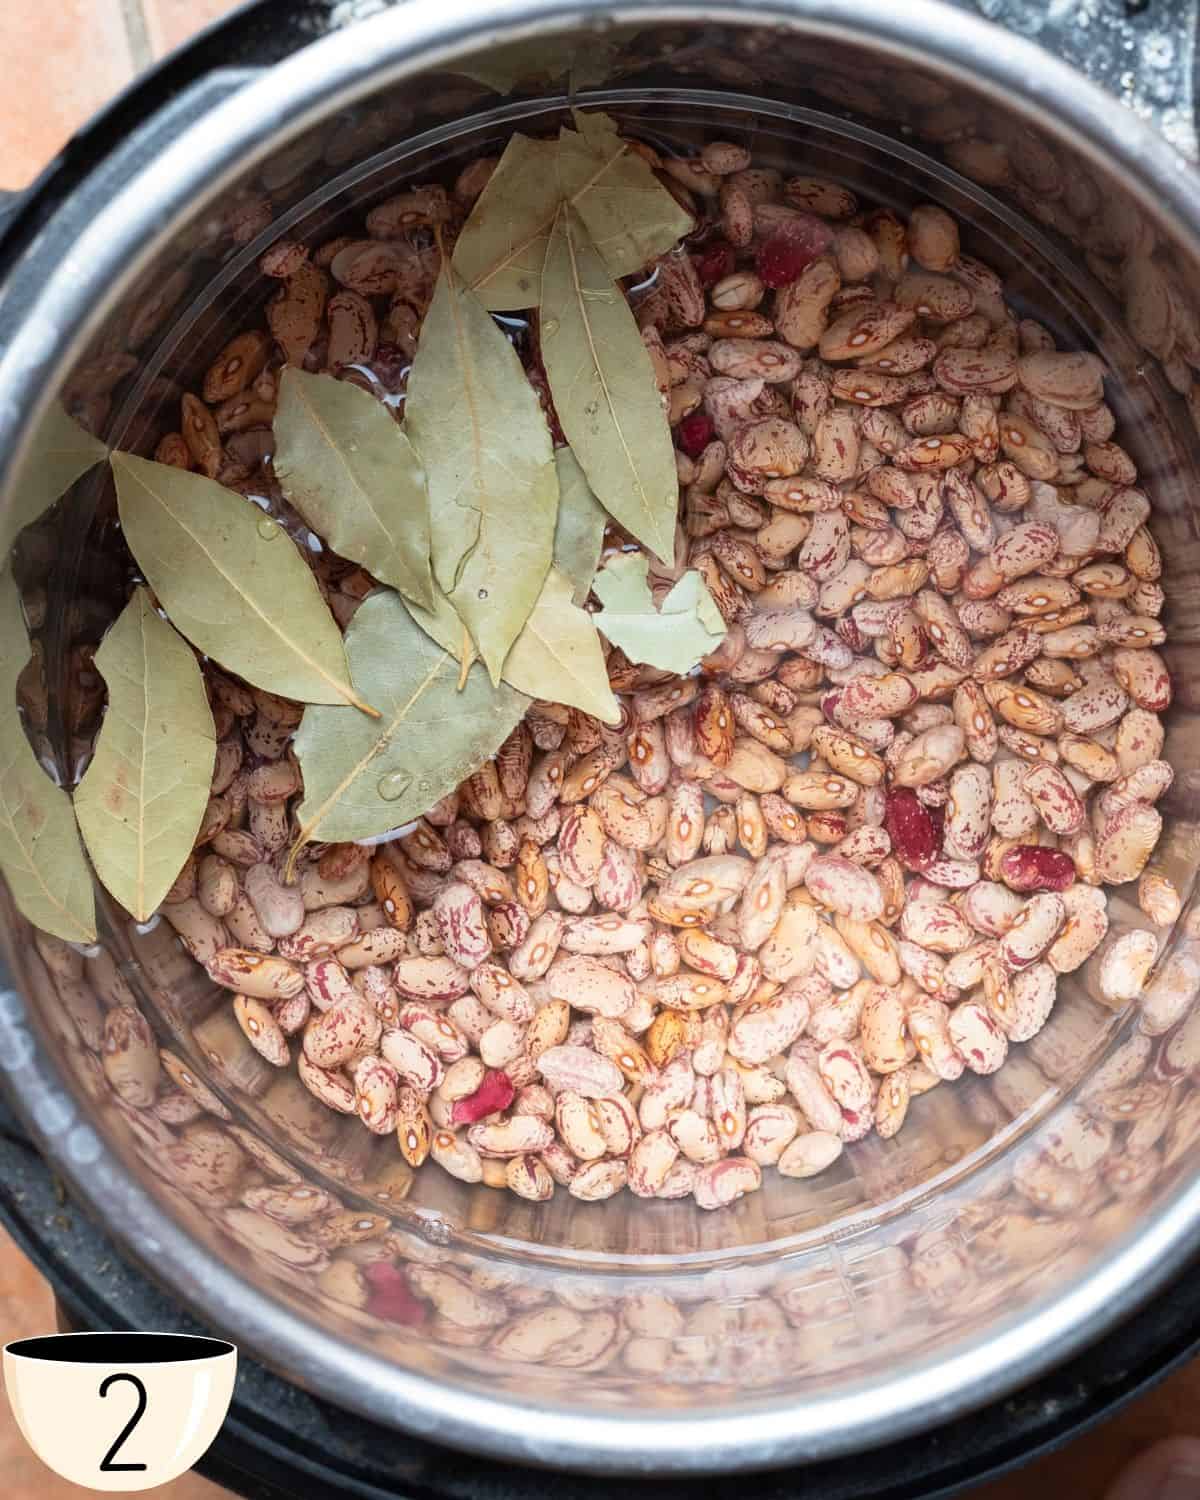 Pinto beans in a pot of water with bay leaves on top, ready for the flavors to infuse during the cooking process.